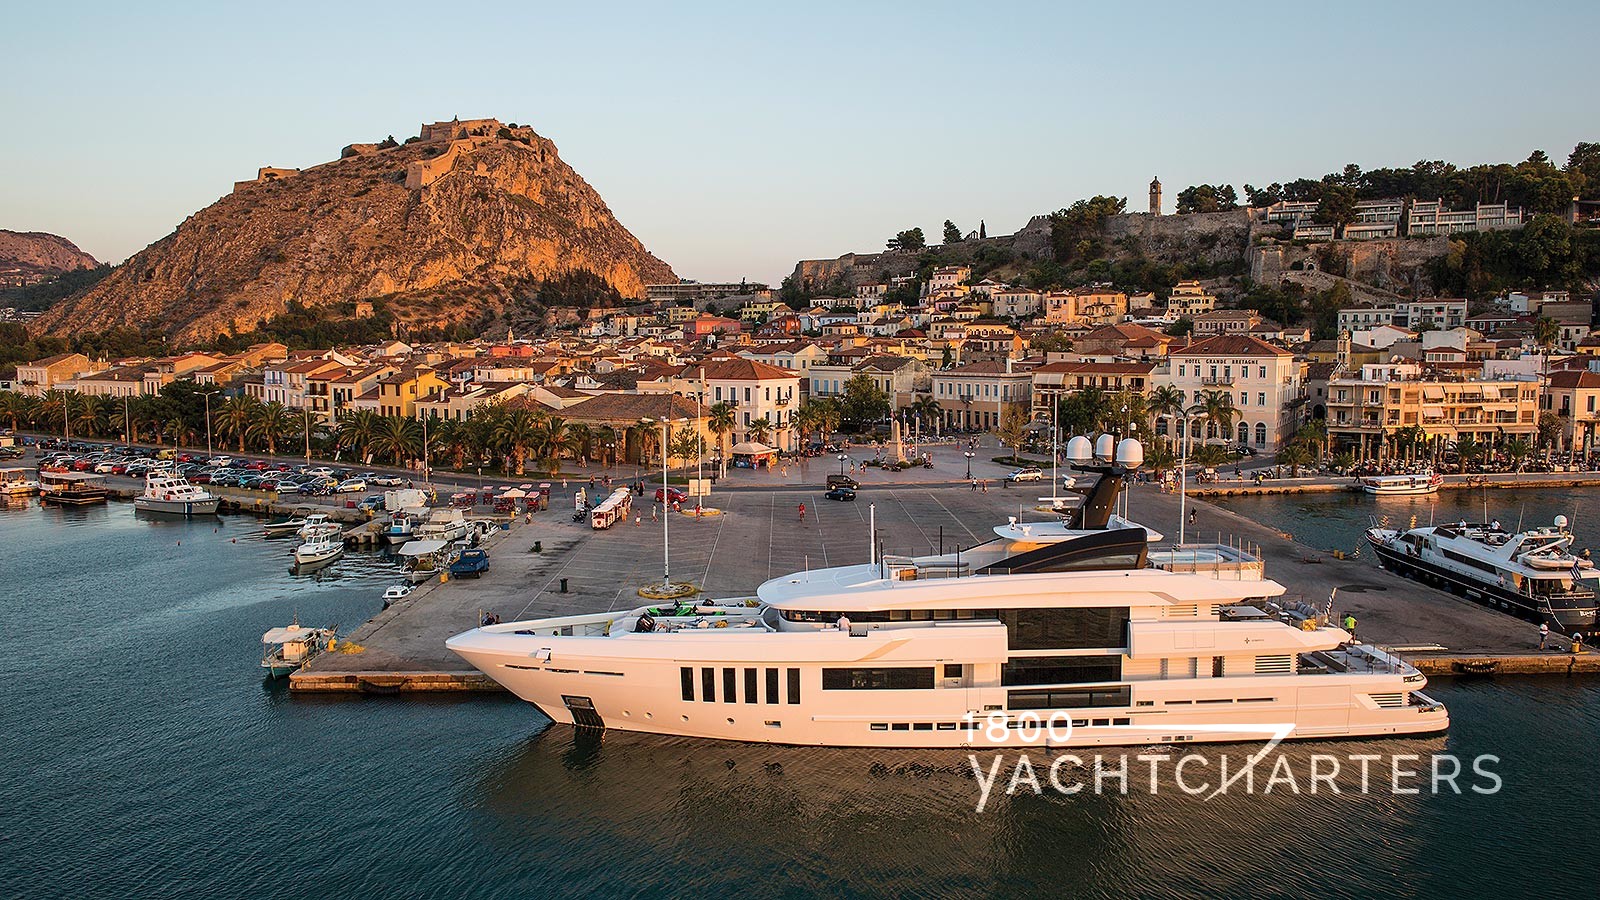 Profile photograph of a white yacht anchored in a marina.  She is the largest yacht in the marina. There are many small boats behind her.  There are mountains in the background.  The sun is setting in front of the yacht, so she is bathed in golden light.